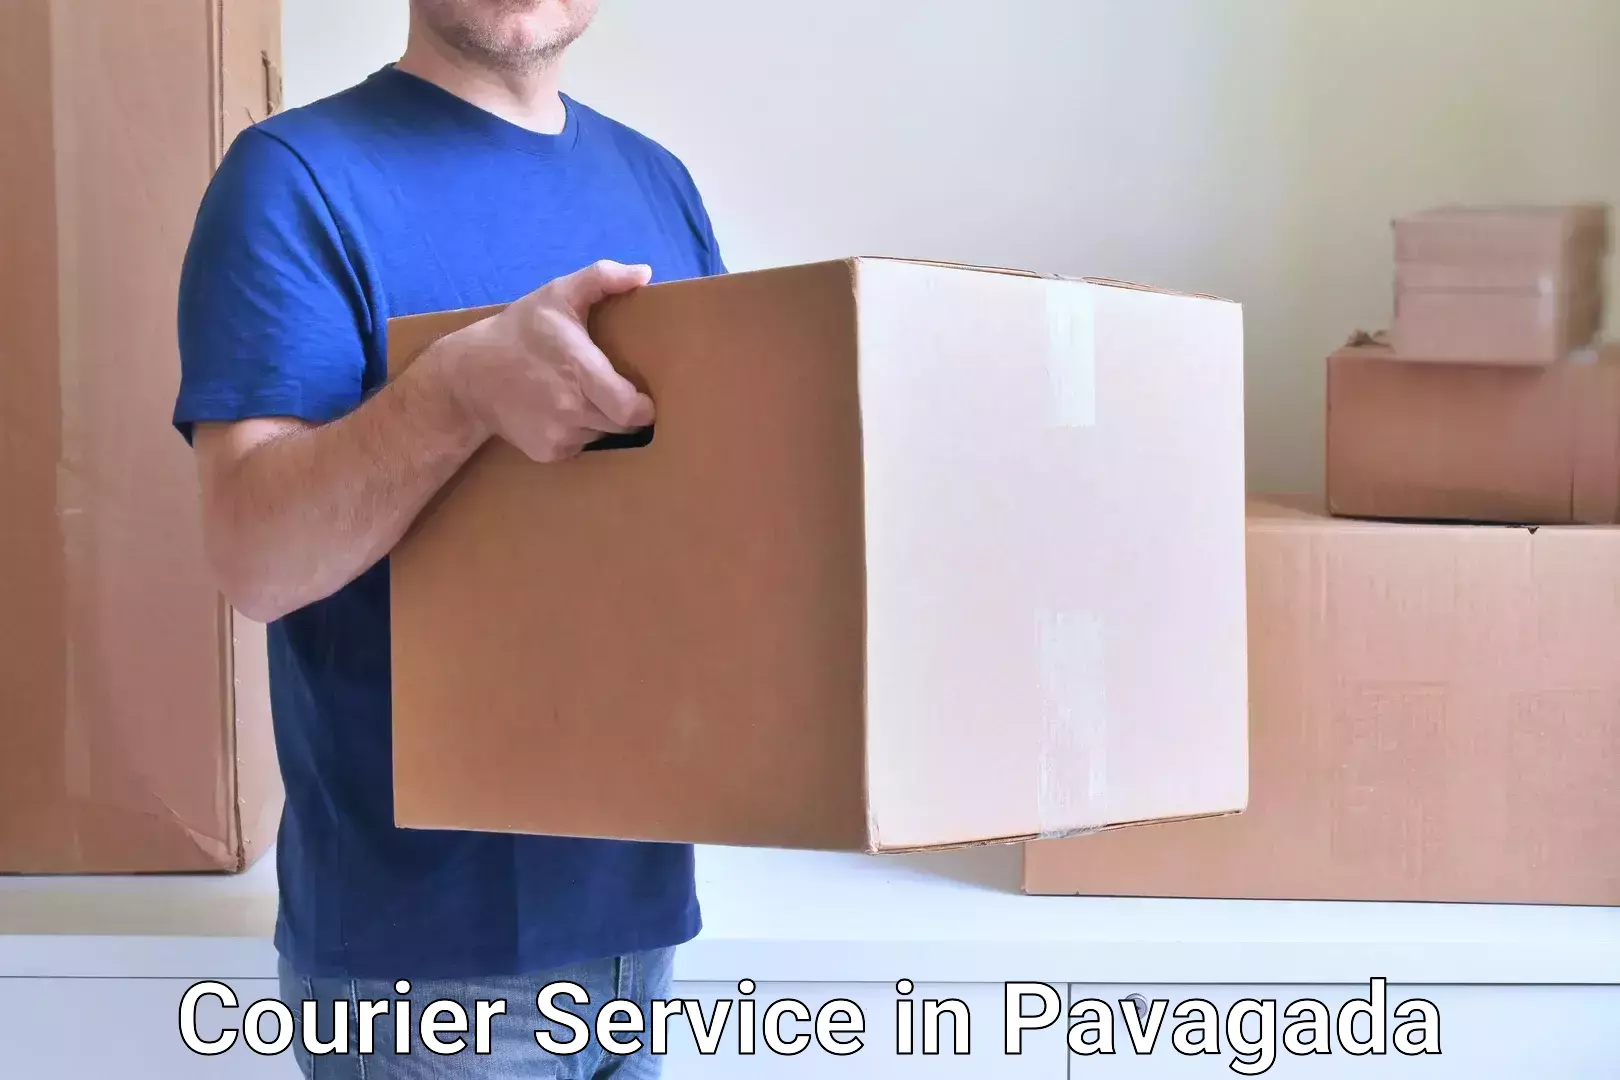 Reliable courier service in Pavagada